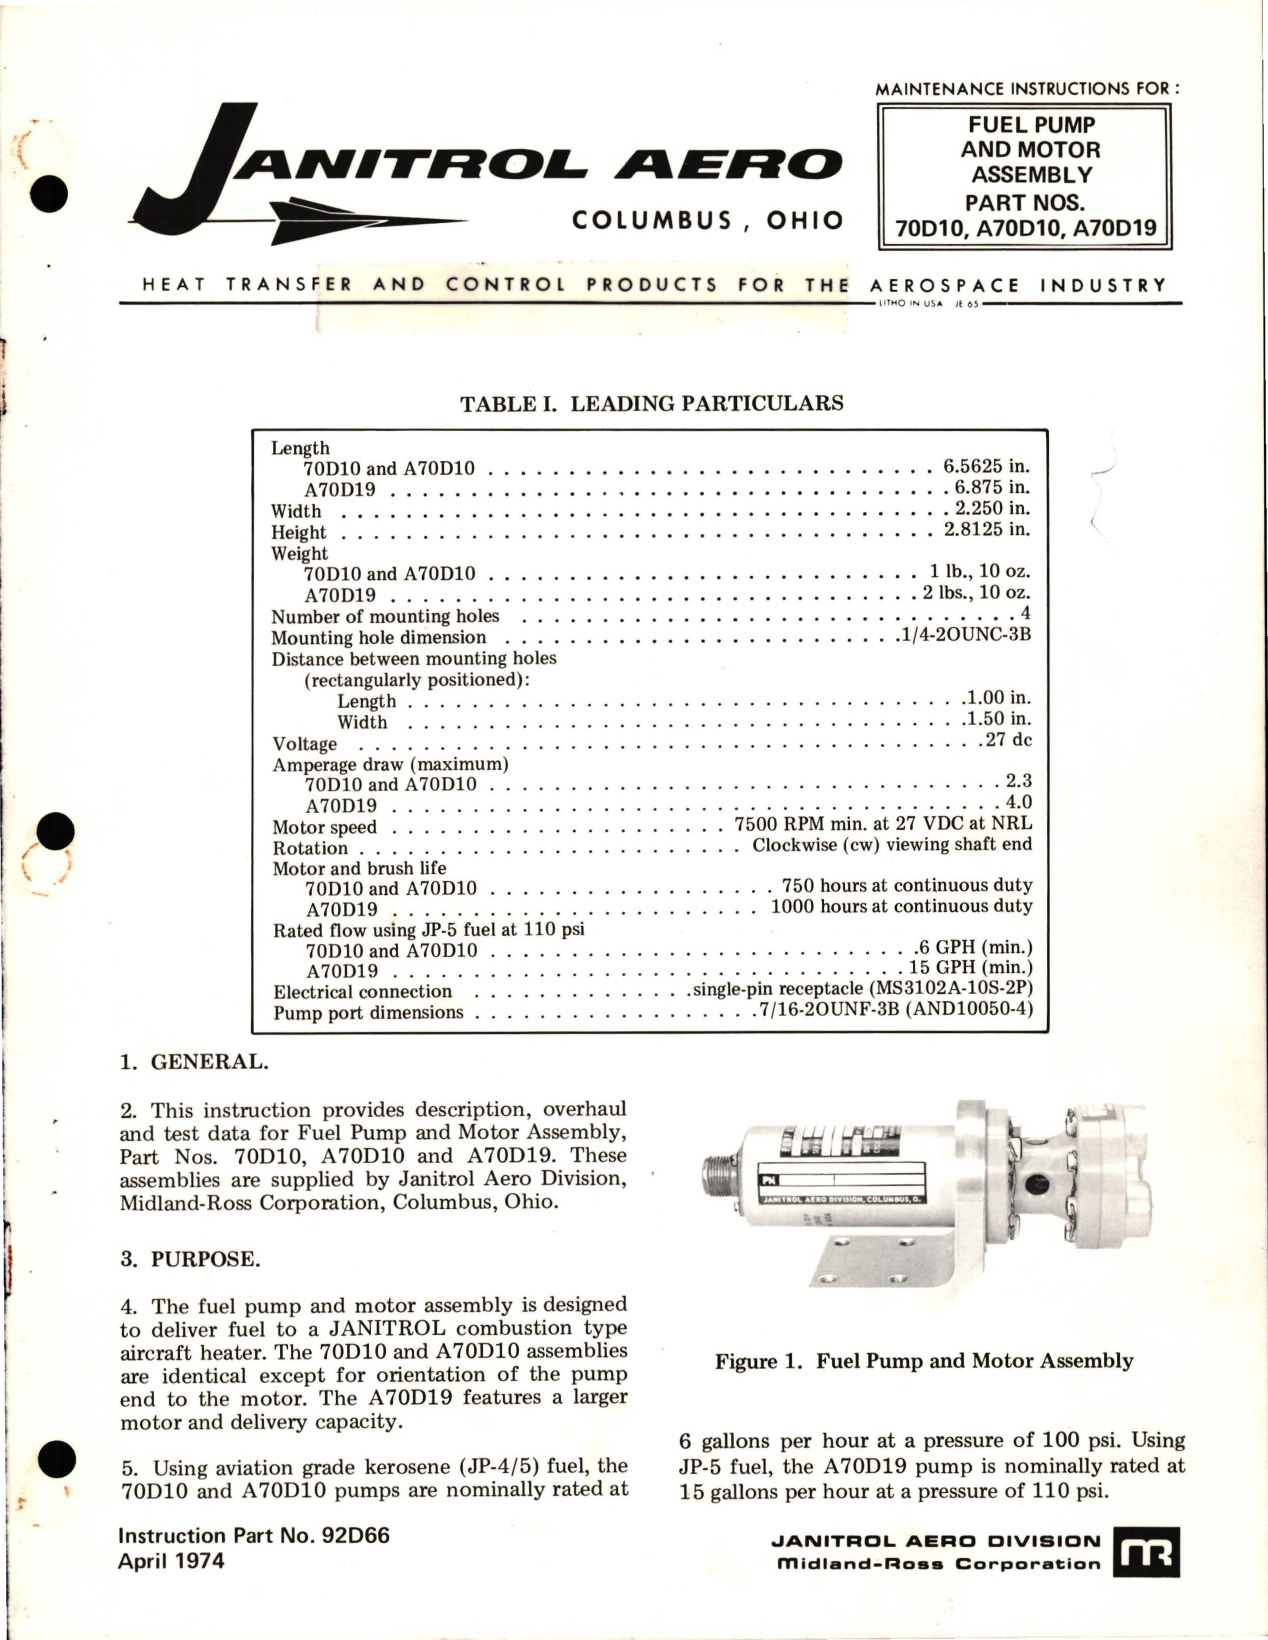 Sample page 1 from AirCorps Library document: Maintenance Instructions for Fuel Pump and Motor Assembly - Parts 70D10, A70D10, and A70D19